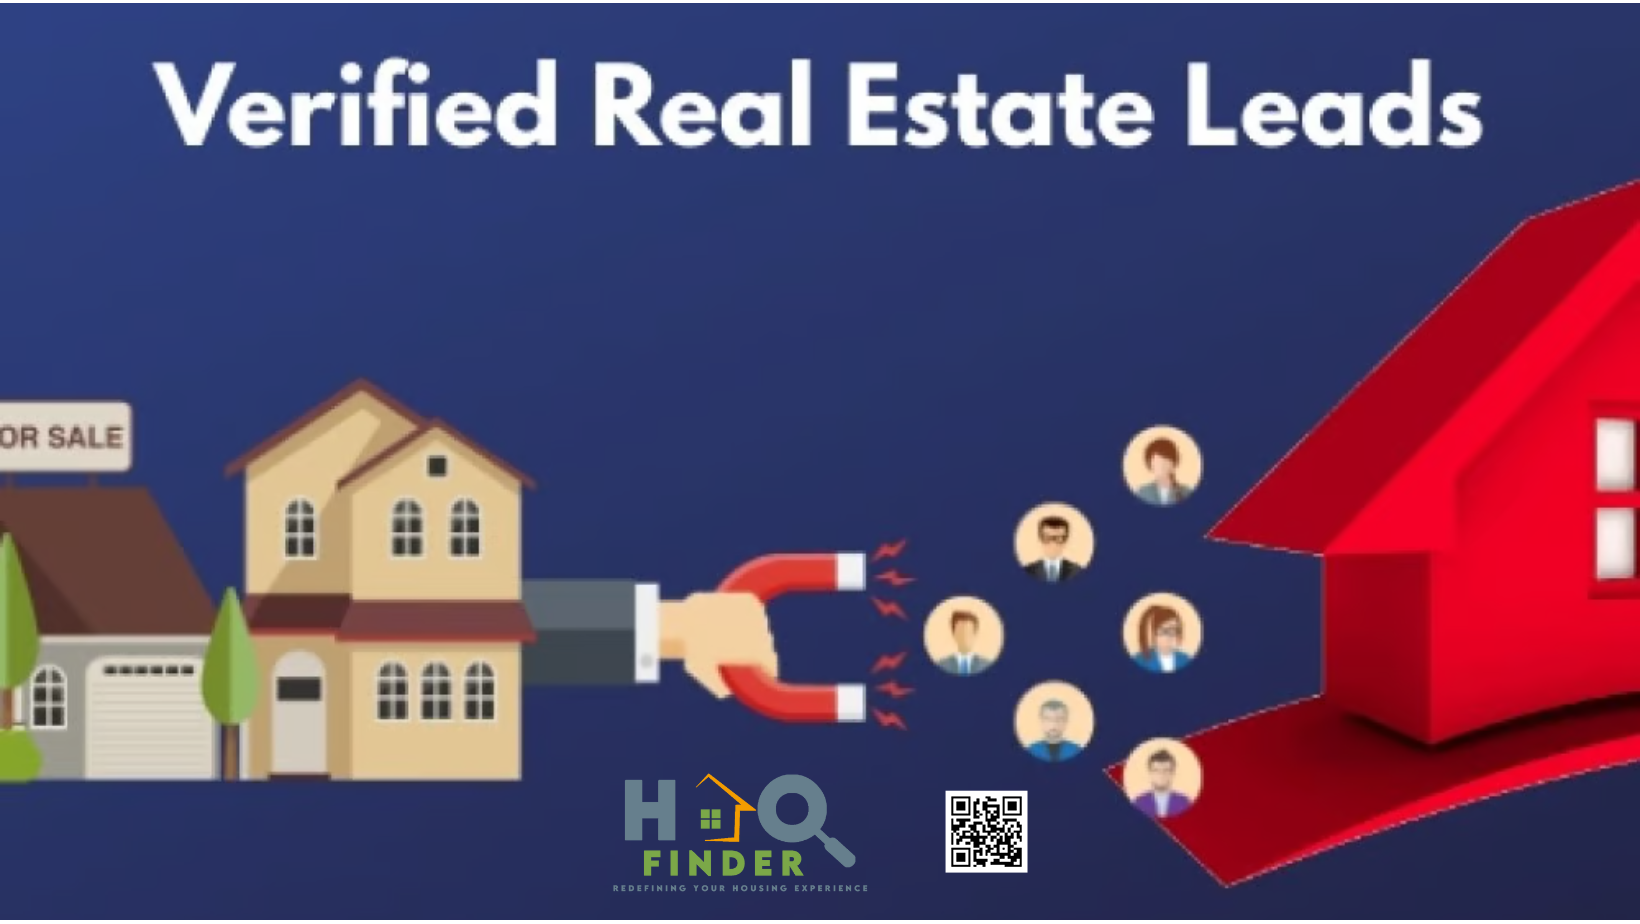 Supercharge Your Real Estate Business with Verified Leads | Hao Finder Lead Generation Services